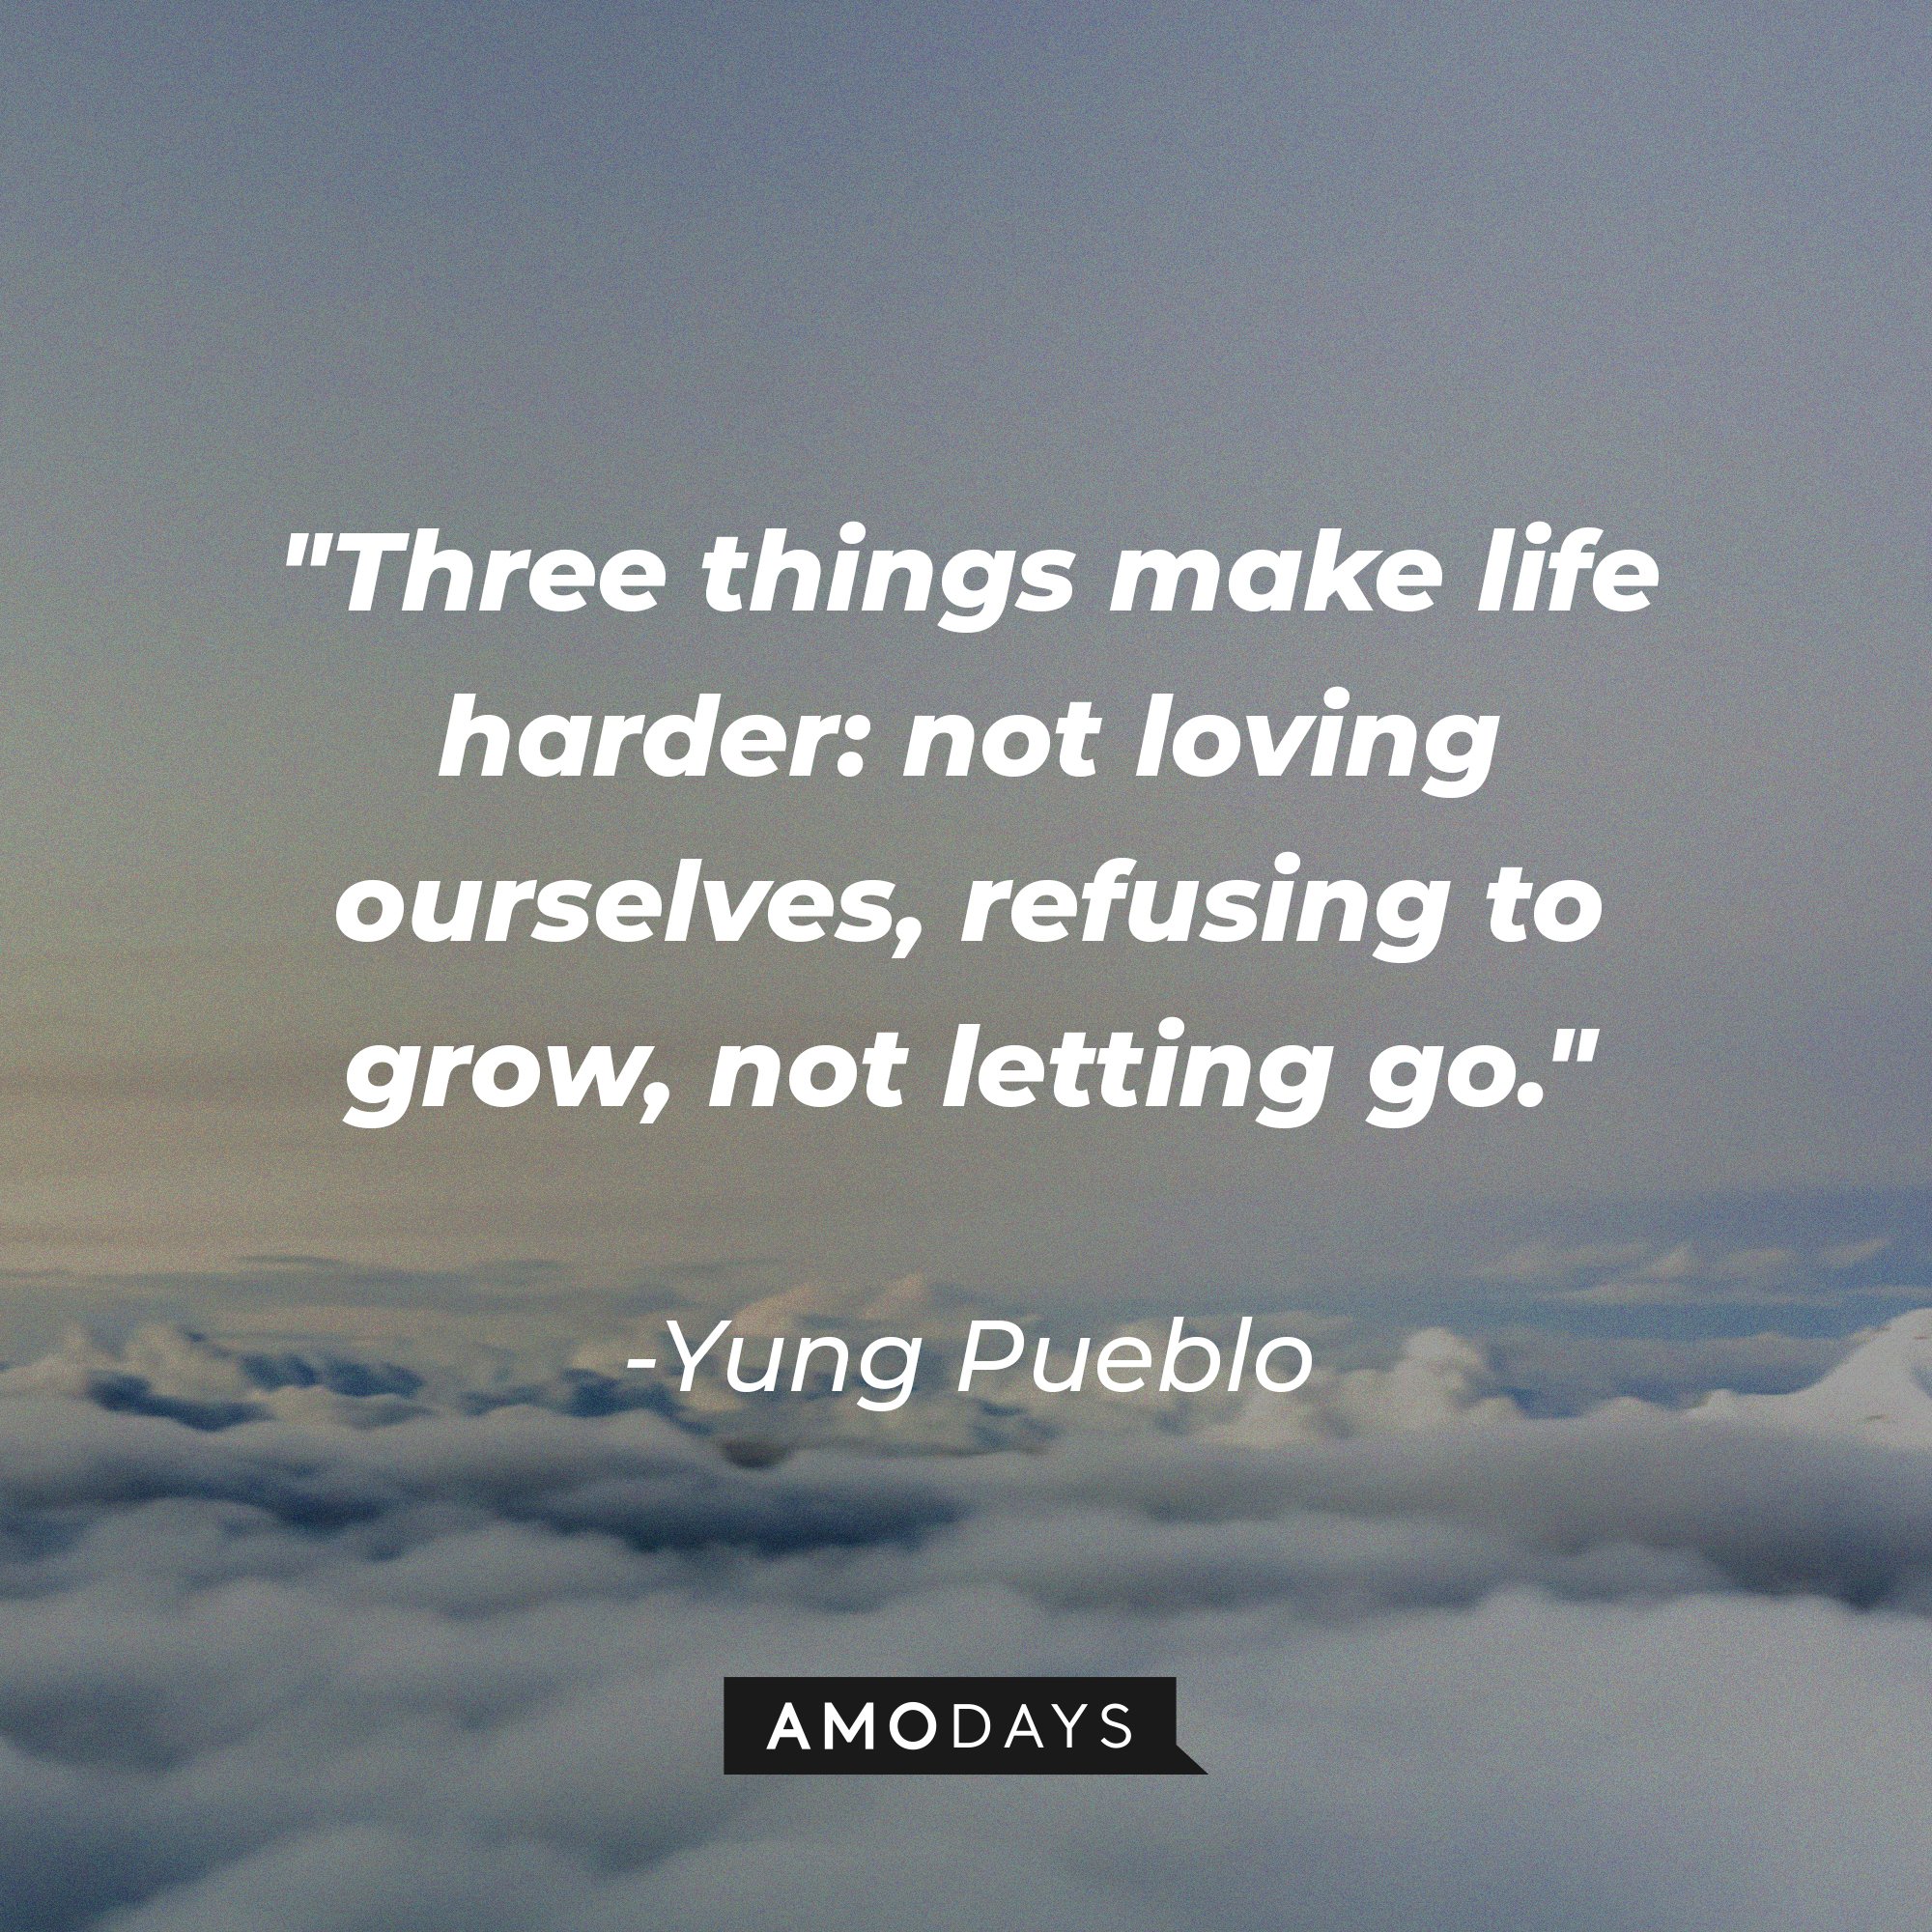 Yung Pueblo's quote "Three things make life harder: not loving yourself refusing to grow, not letting go." | Source: Unsplash.com